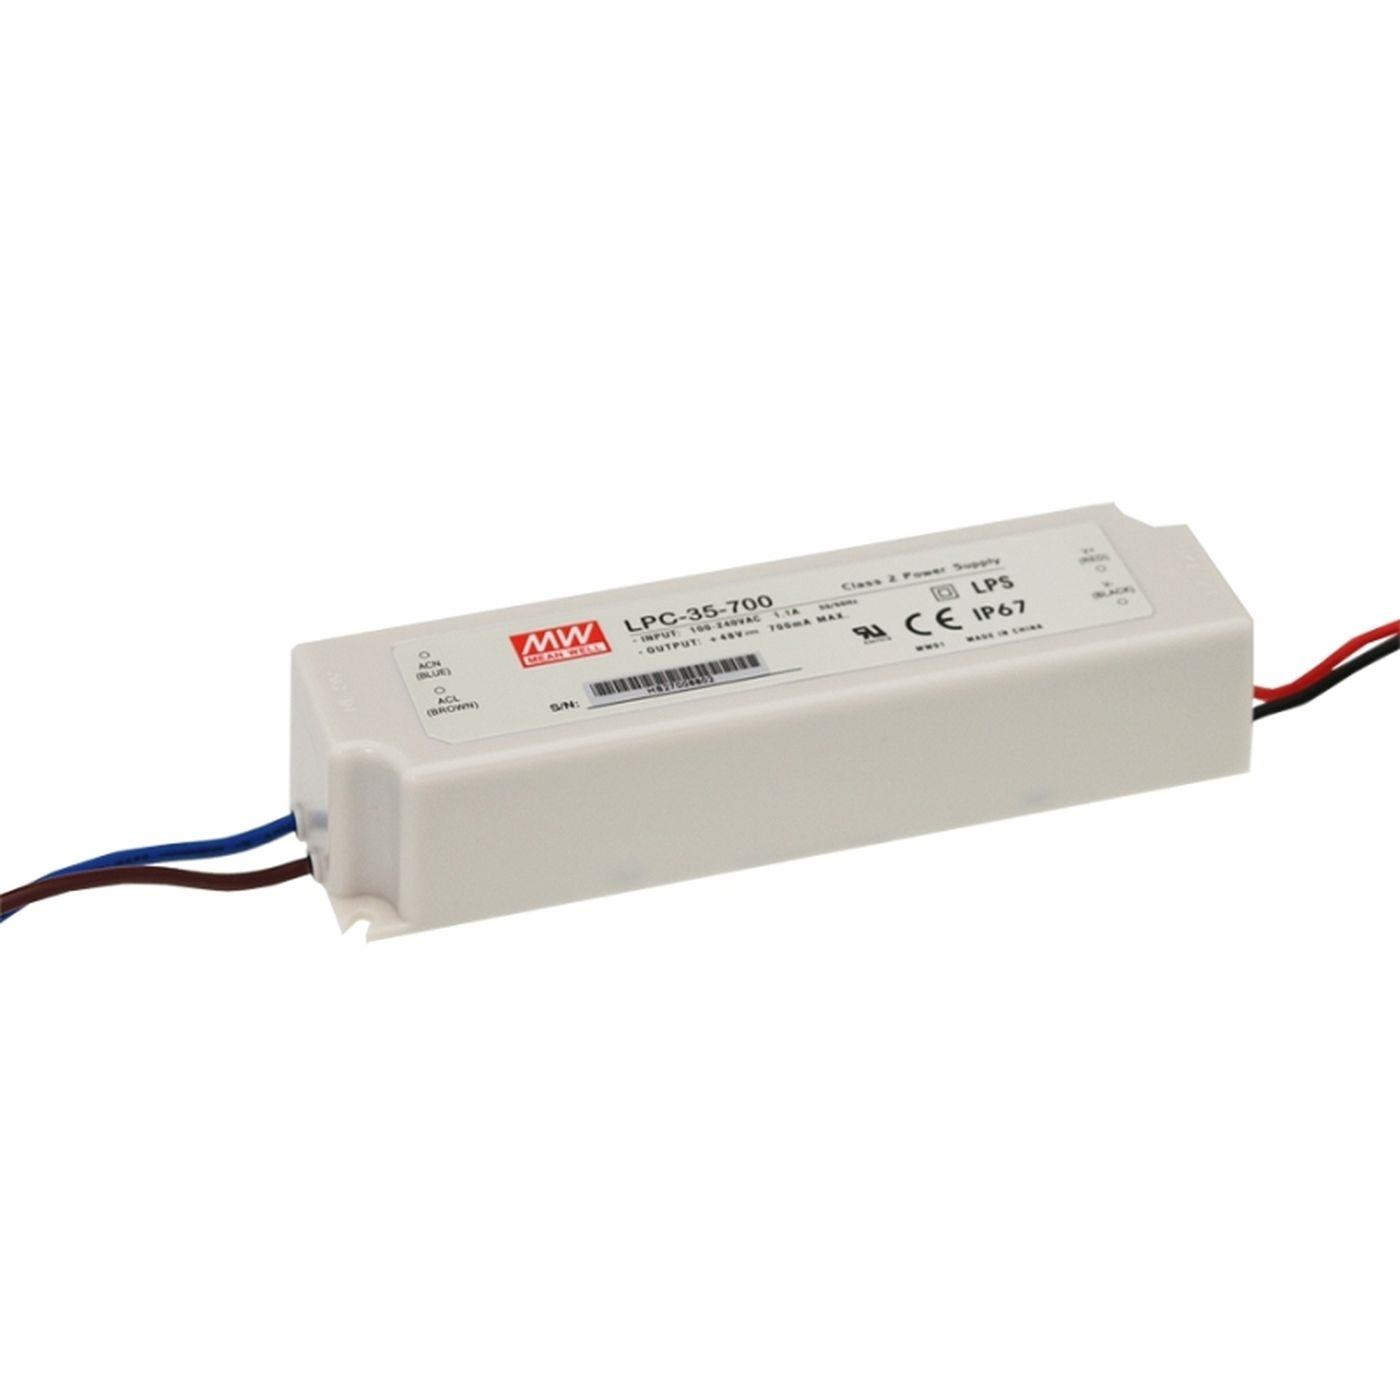 LPC-35-1400 34W 1400mA 6...24VDC Constant current LED power supply Driver Transformer IP67